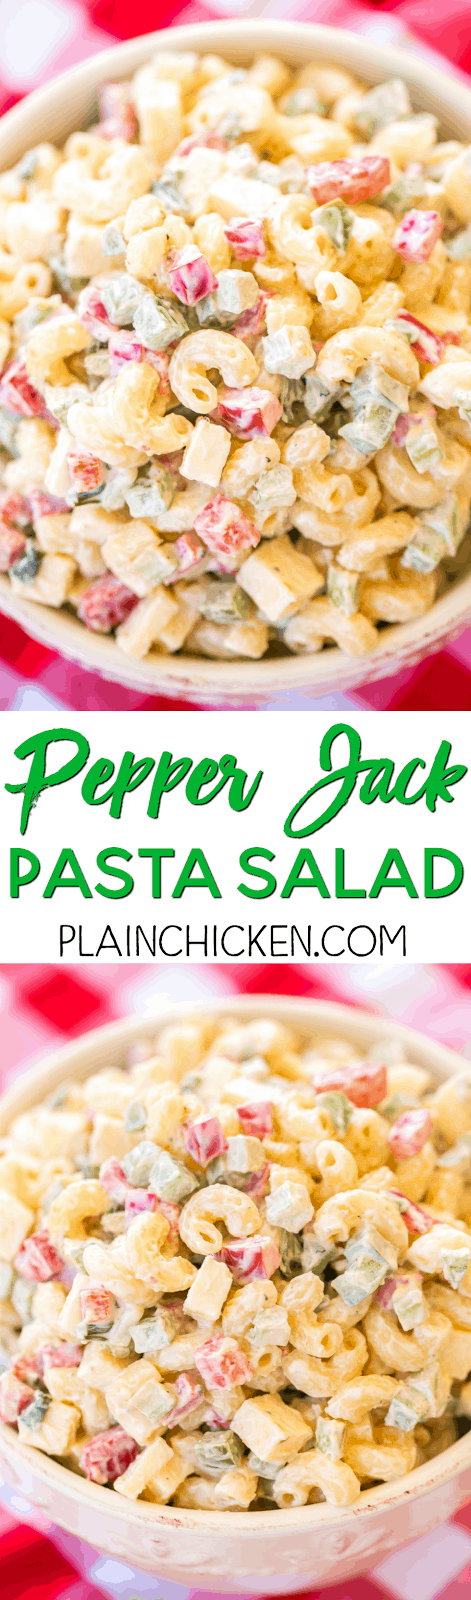 Pepper Jack Pasta Salad - seriously DELICIOUS! So simple, yet so amazing! Macaroni, pepper jack cheese, red bell pepper, green bell pepper, celery, green onions, mayonnaise, salt and pepper. Can make ahead and refrigerate until ready to eat. Perfect for summer potluck! Such an easy side dish recipe!